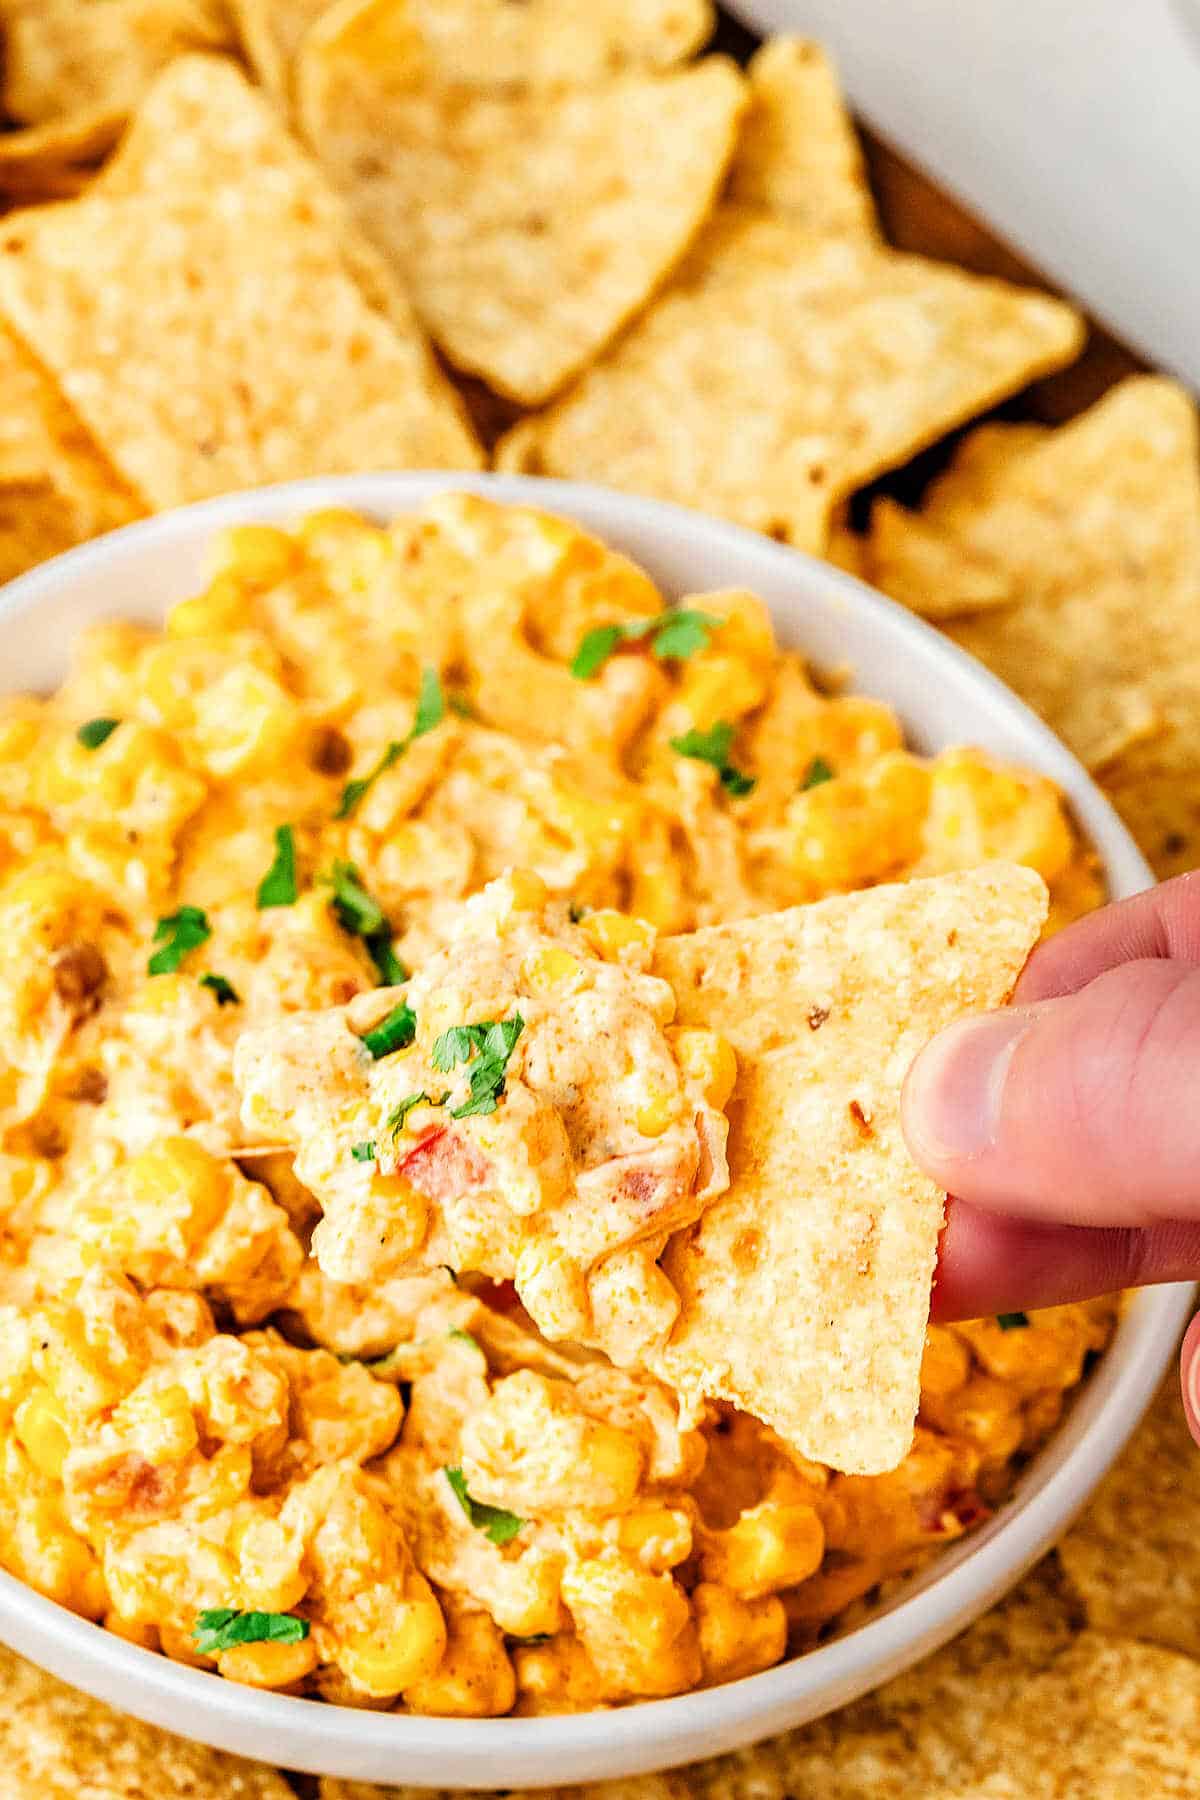 Dipping a chip into a bowl of hot corn dip.